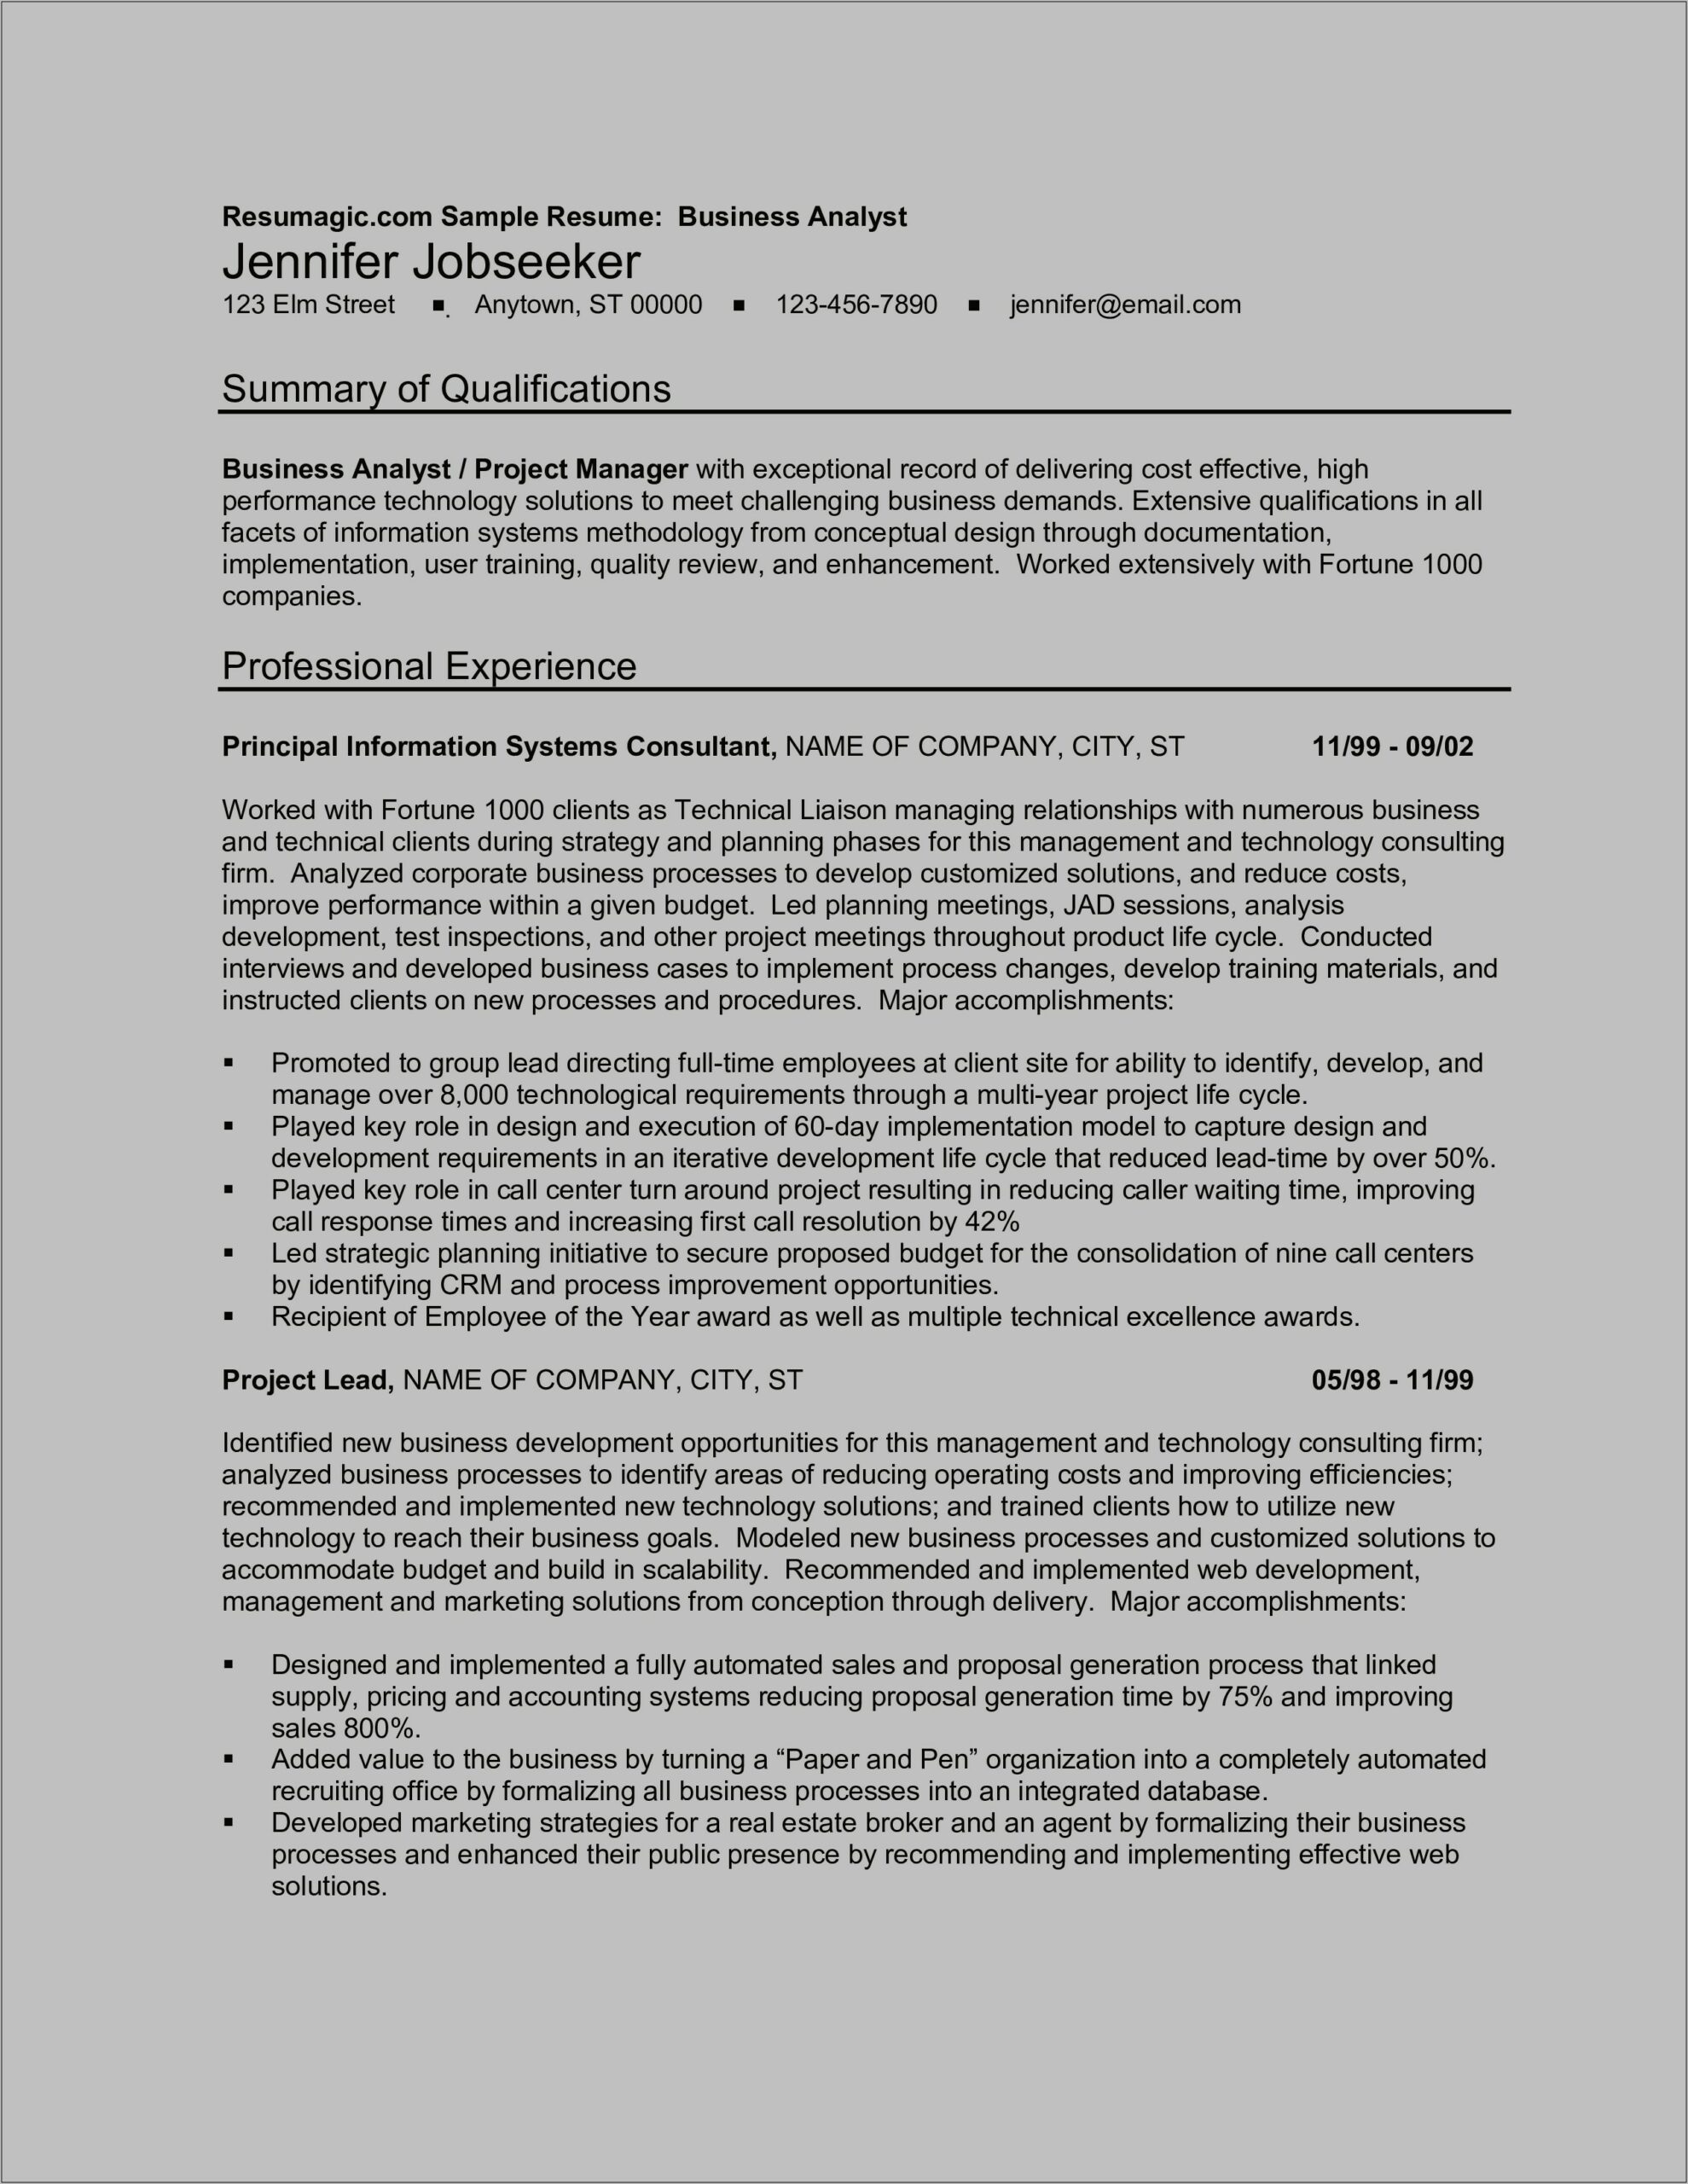 Resume Objectives For Management Analyst Position